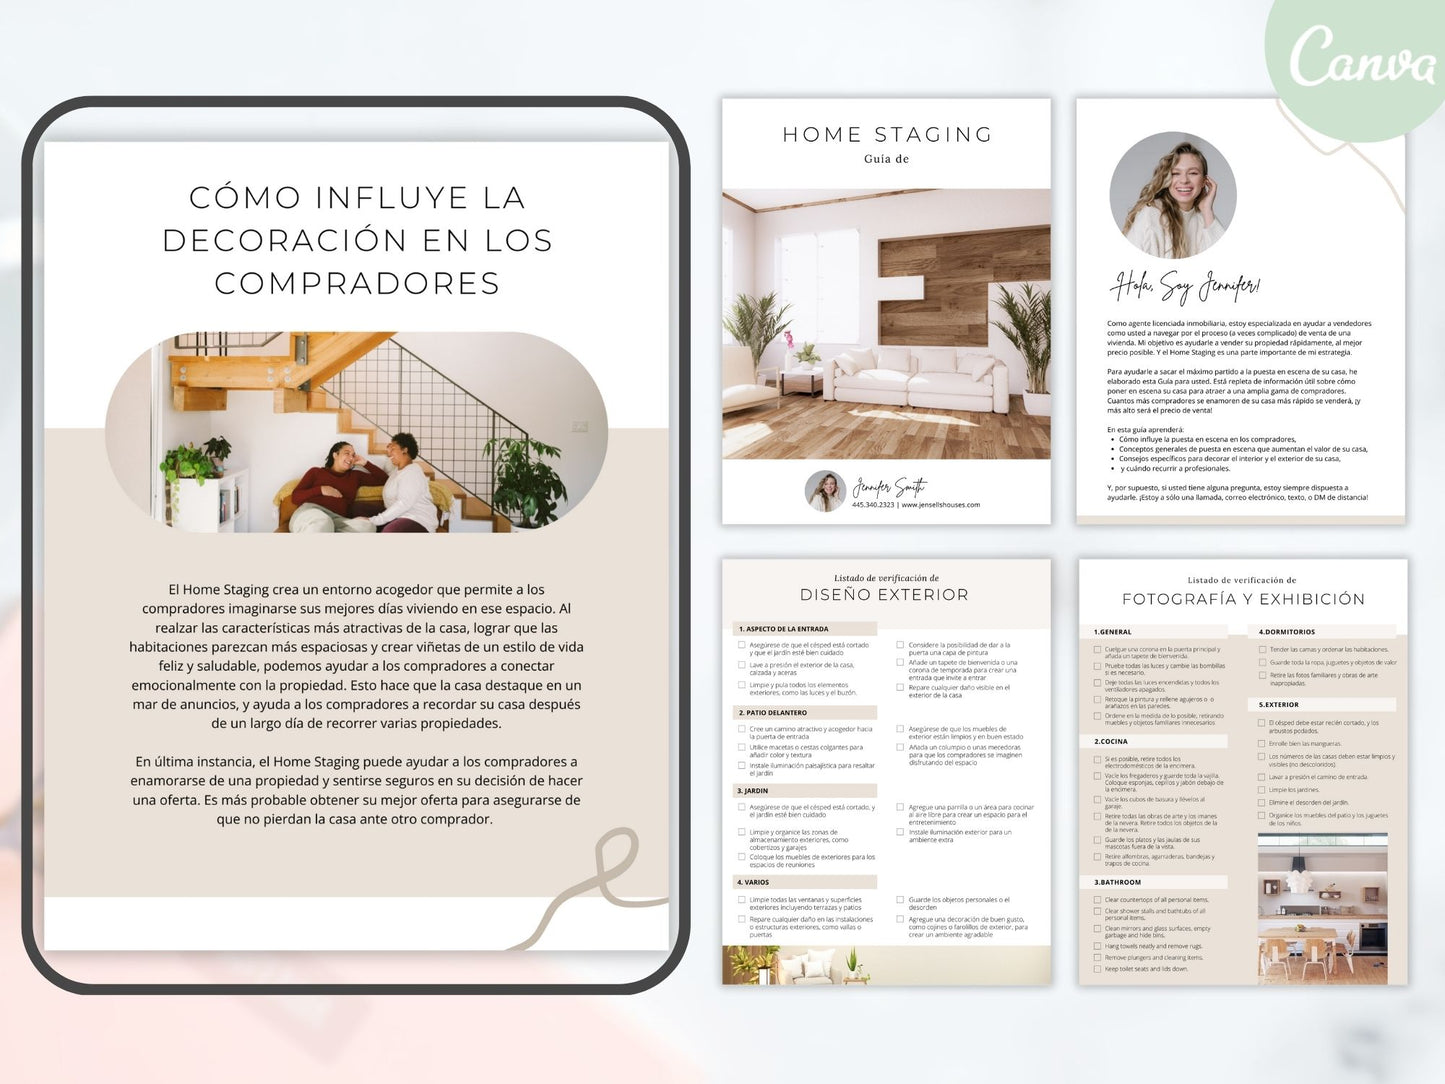 Spanish Minimal Staging Guide - Guide in Spanish designed to showcase the best features of your home in a minimal and attractive way.